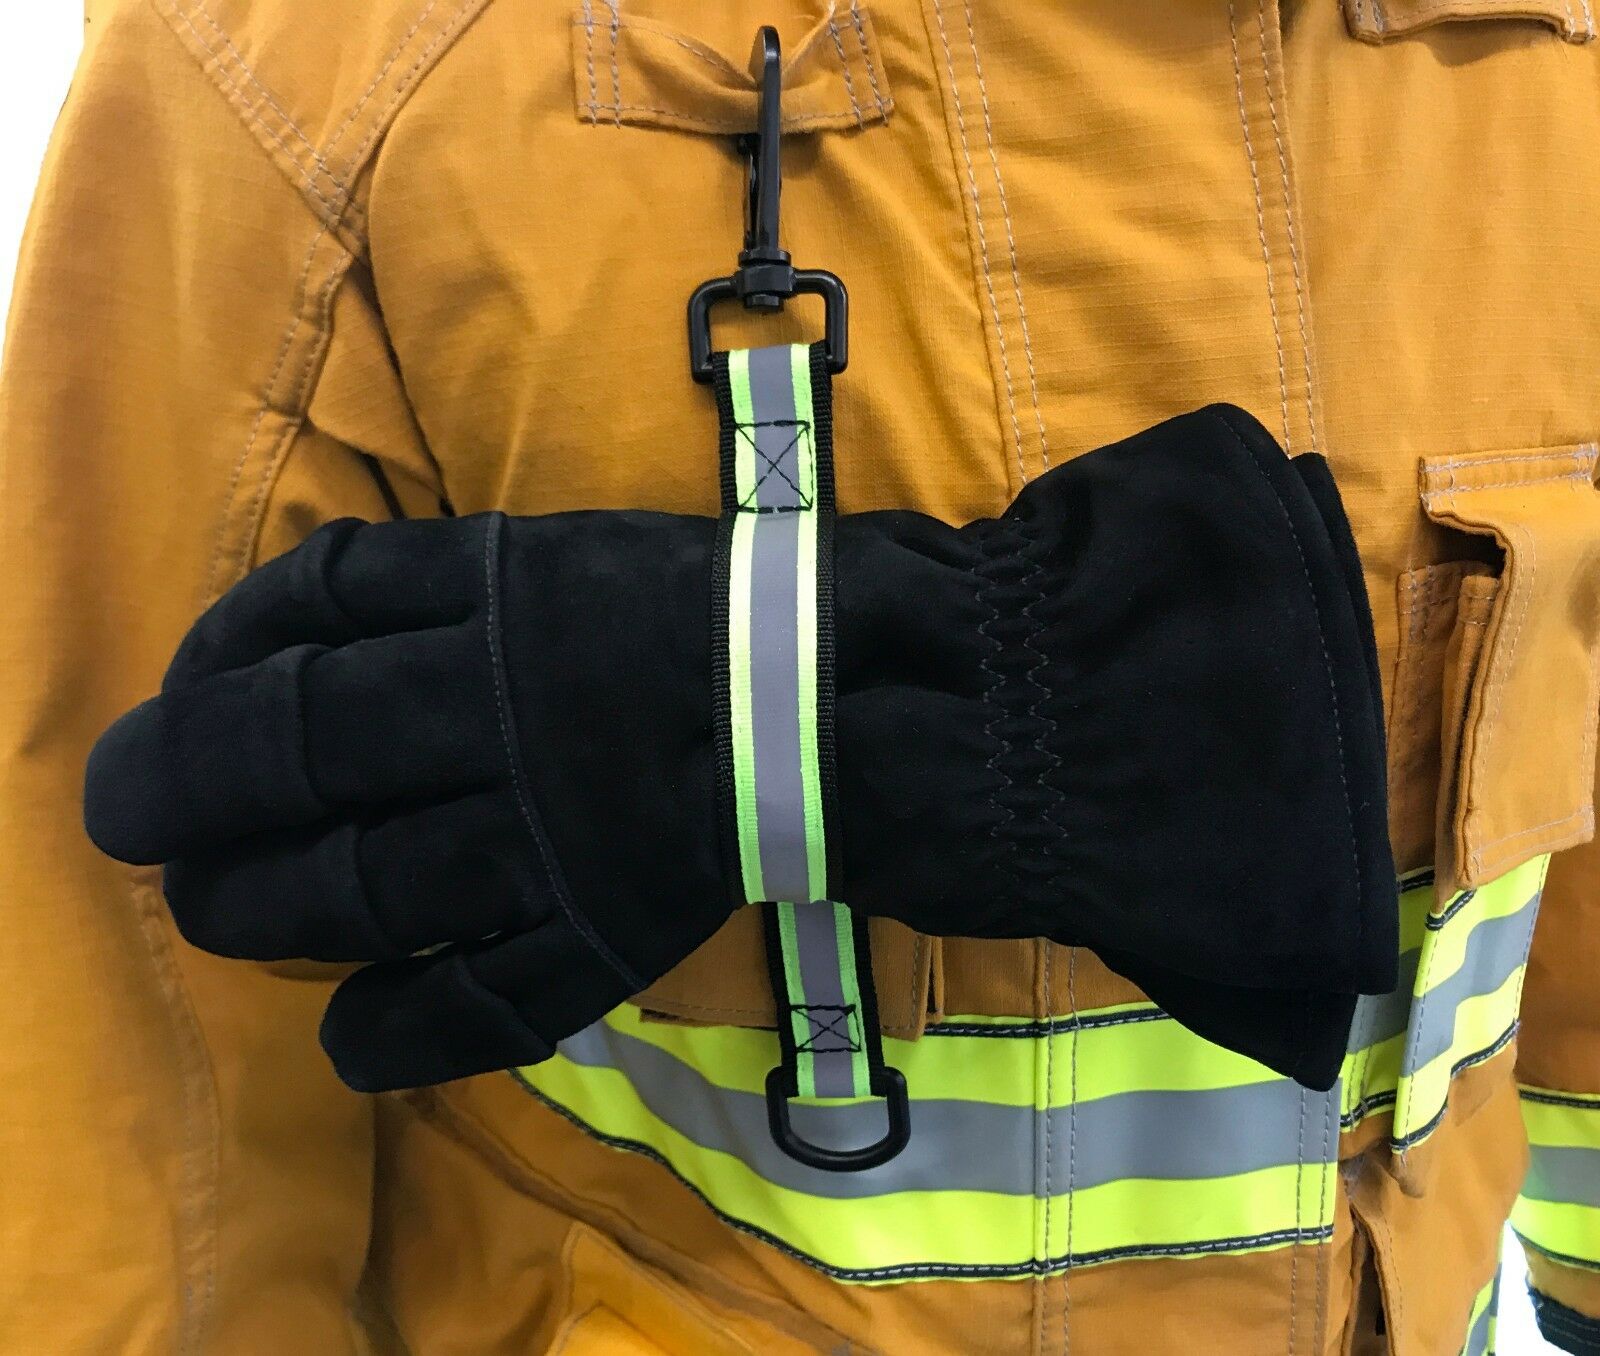 Quick Release Glove Strap With Reflective Trim Firefighter Turnout Gear - Green